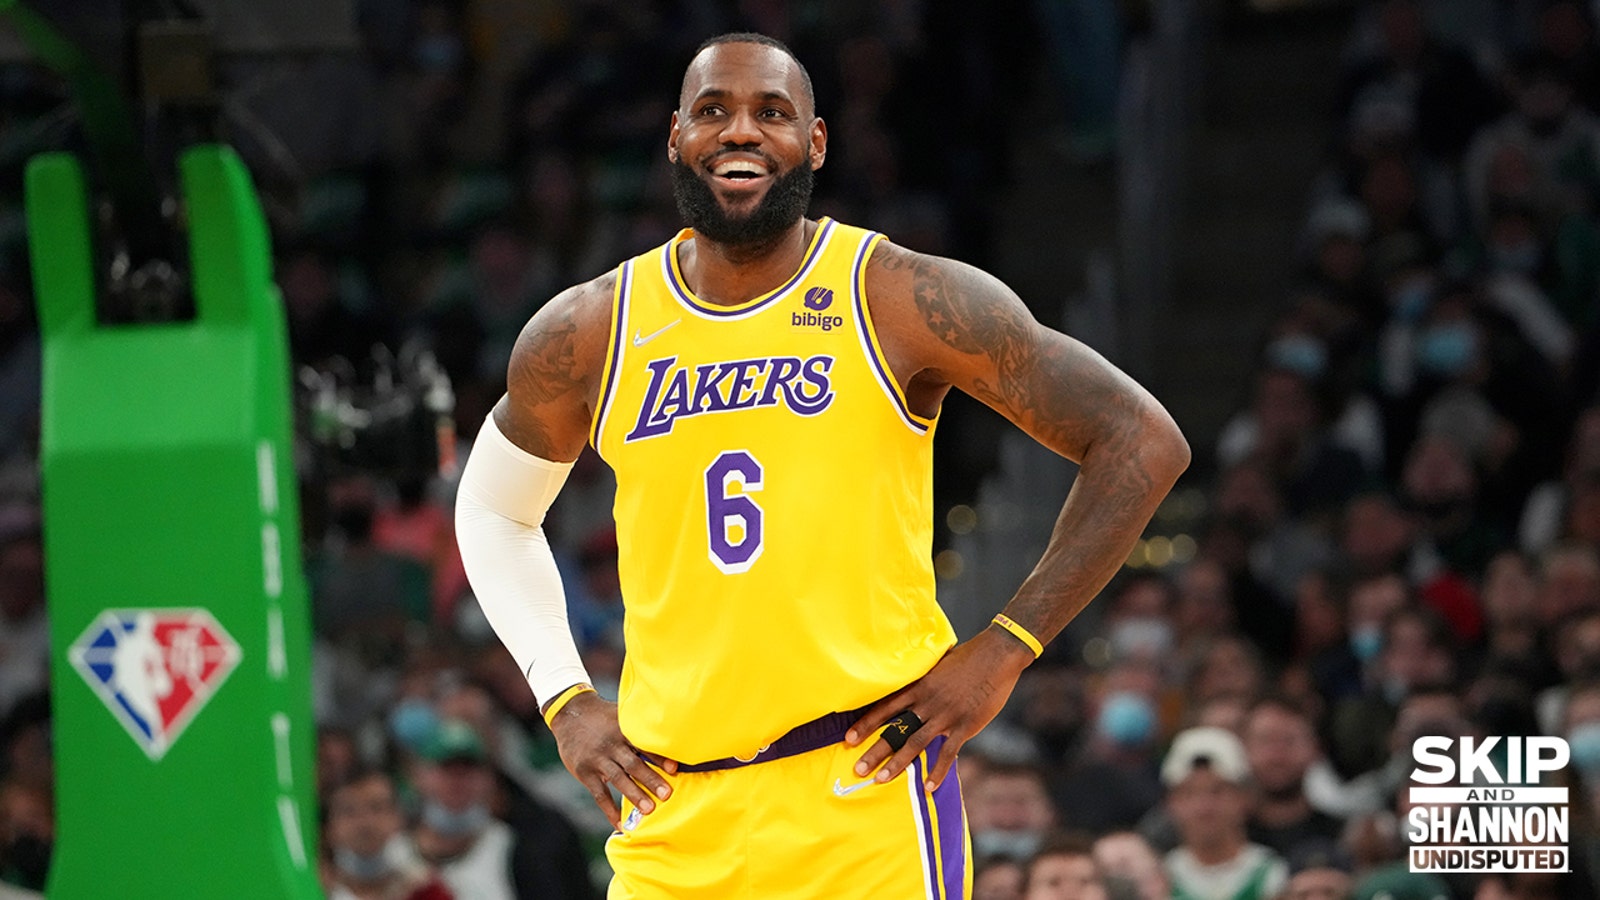 LeBron James 'in awe' of potential to become NBA's all-time leading scorer 